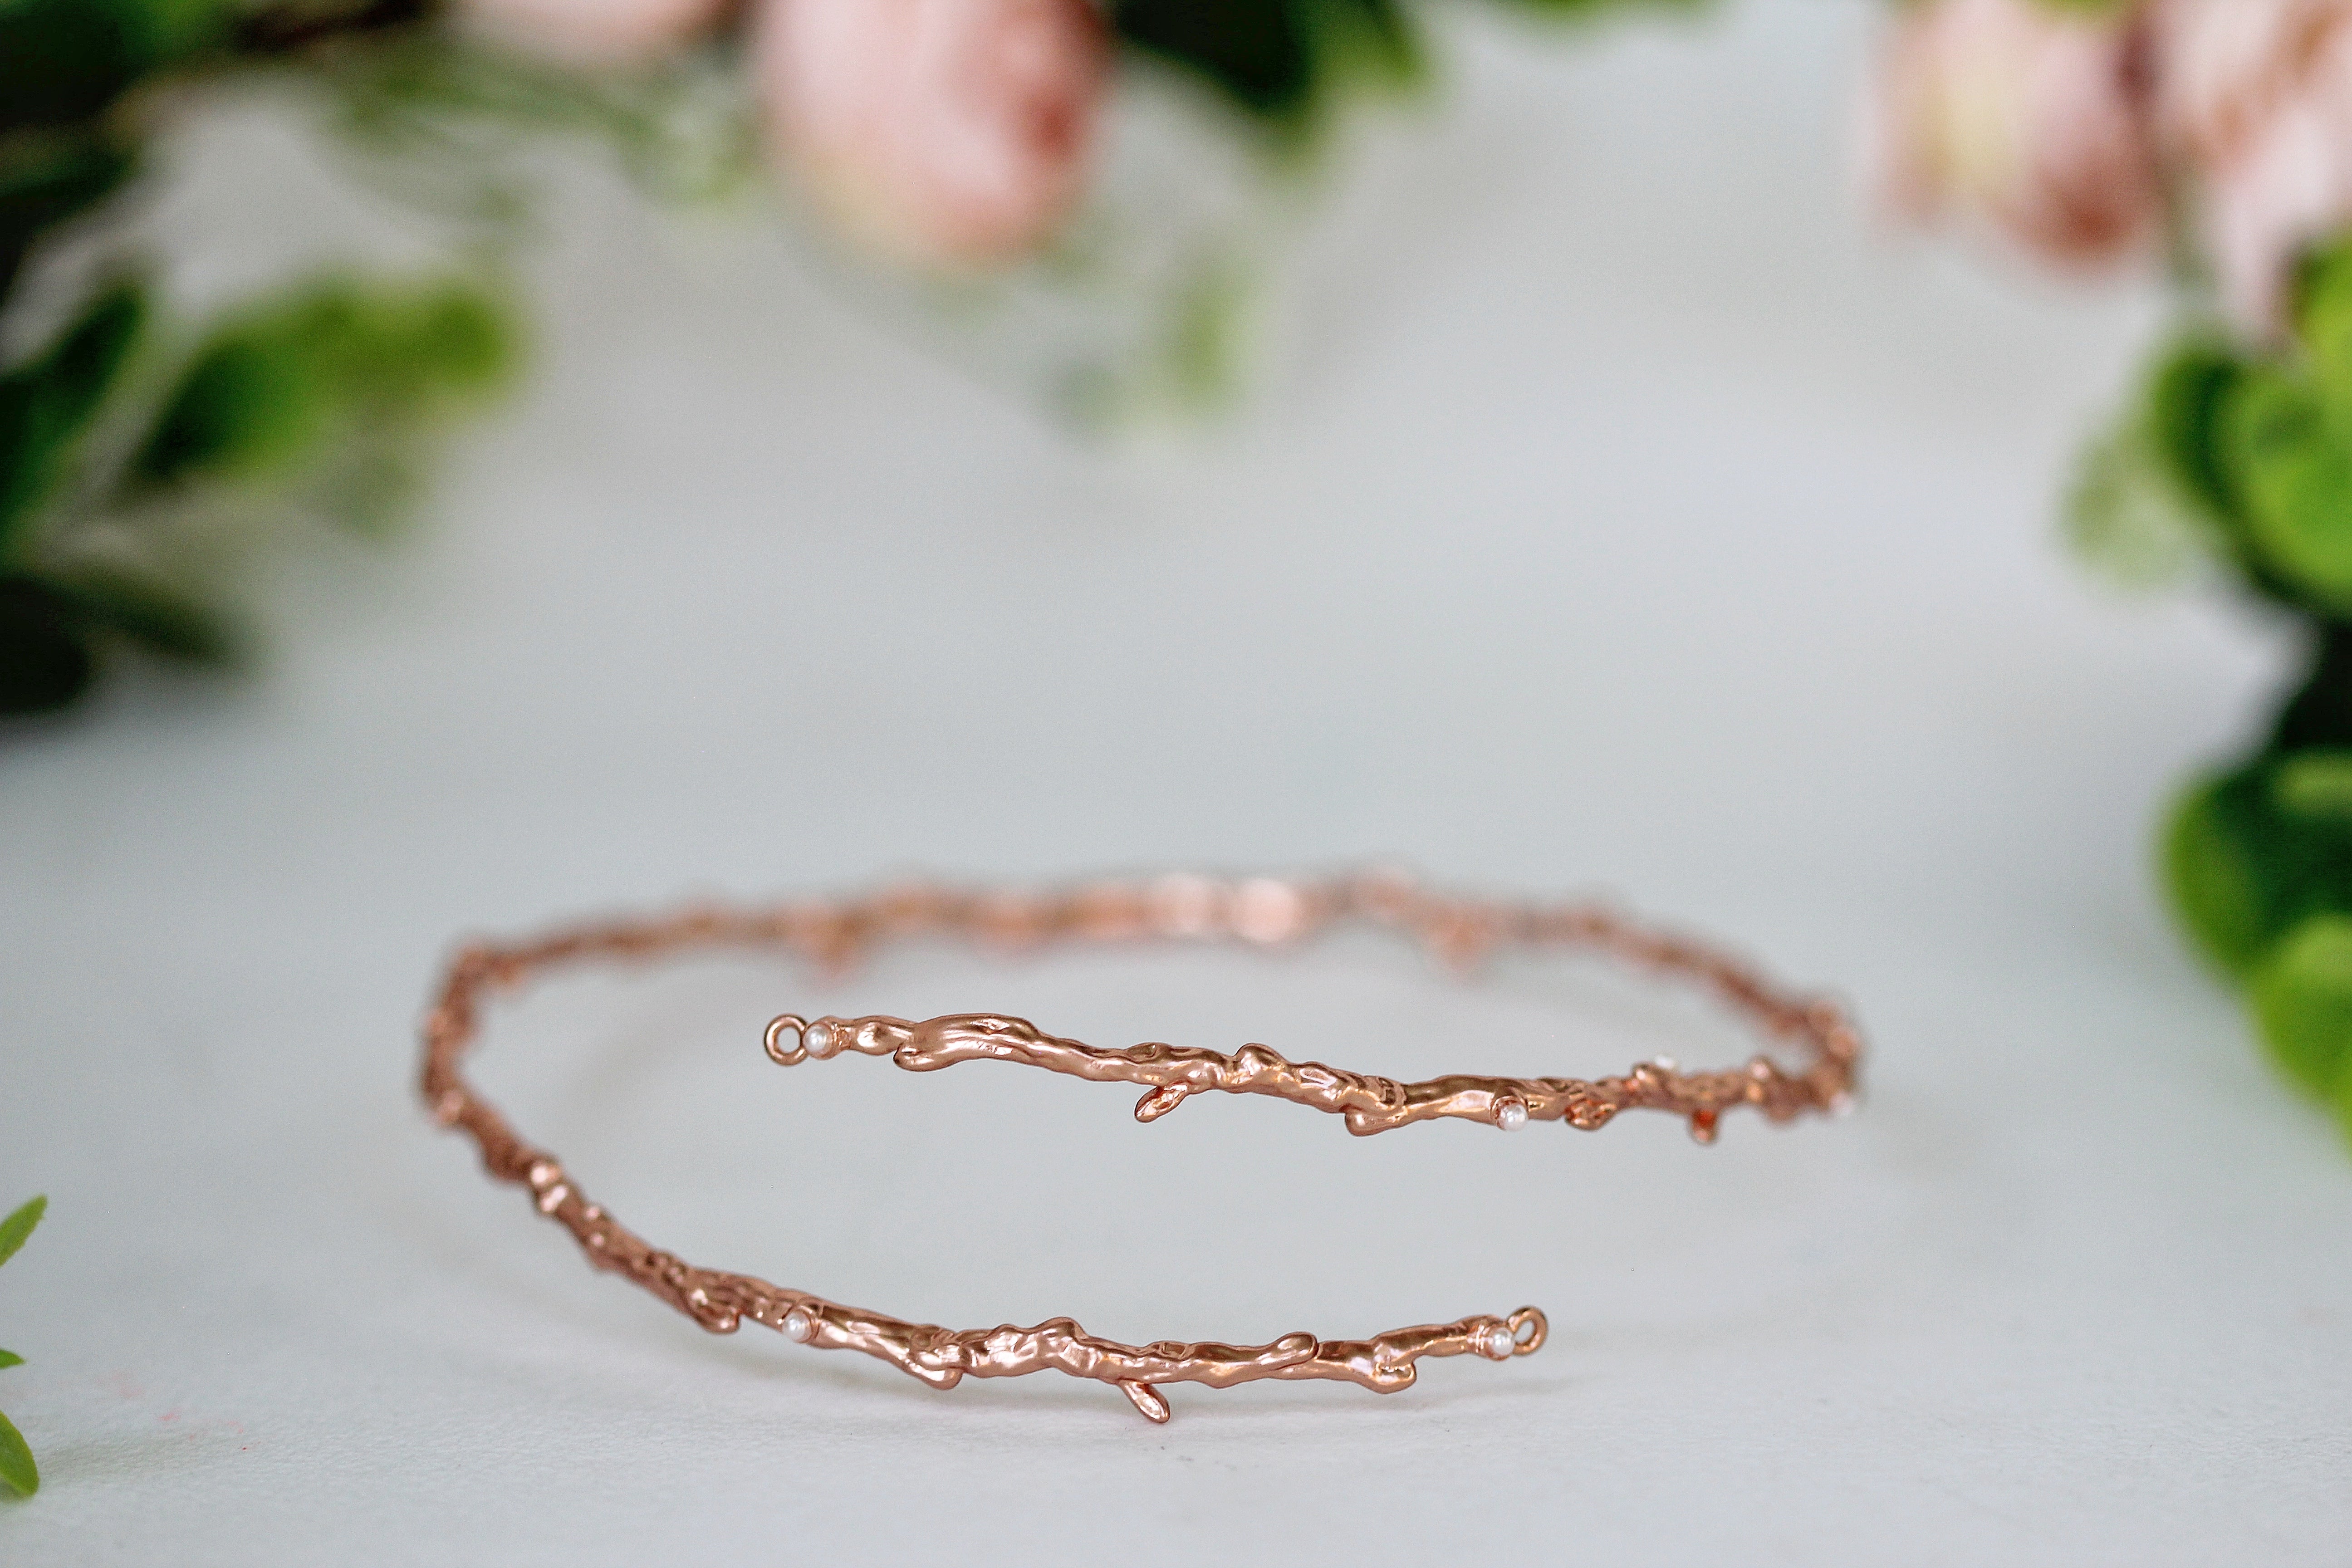 Rustic Branch w/ Seed Pearls Arm Band